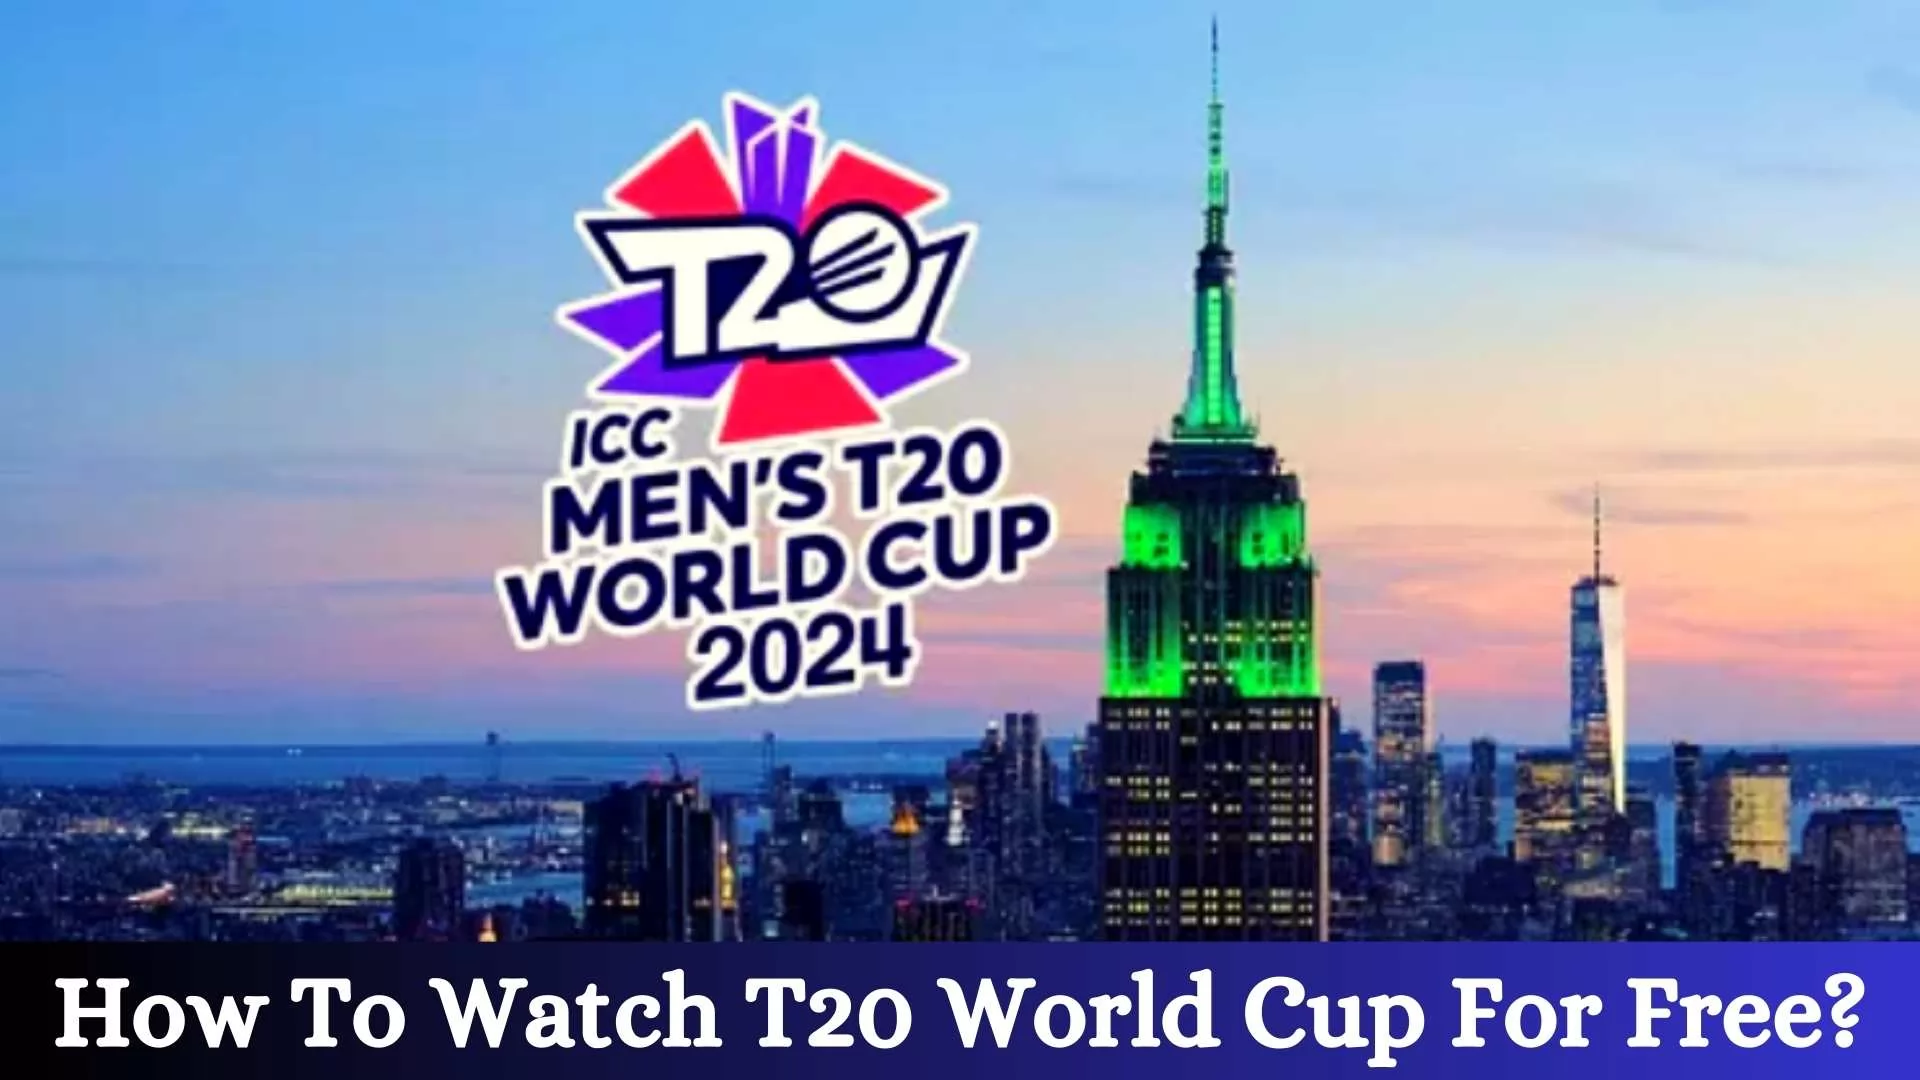 How To Watch T20 World Cup For Free